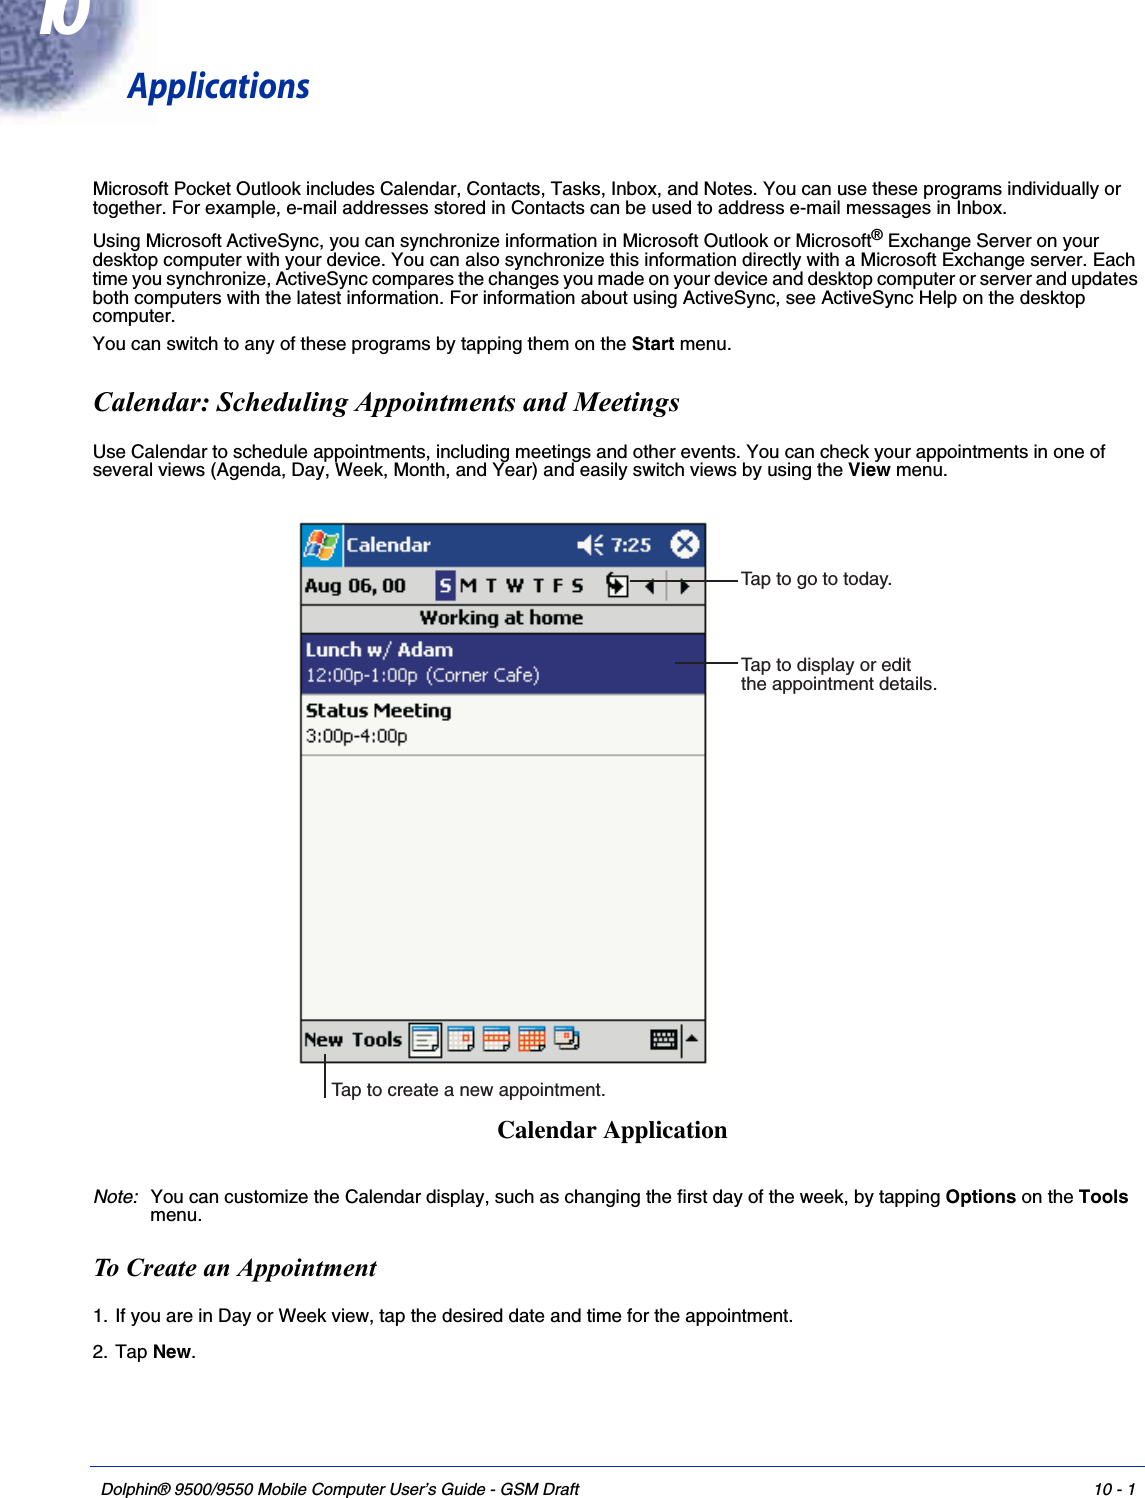 Dolphin® 9500/9550 Mobile Computer User’s Guide - GSM Draft 10 - 110ApplicationsMicrosoft Pocket Outlook includes Calendar, Contacts, Tasks, Inbox, and Notes. You can use these programs individually or together. For example, e-mail addresses stored in Contacts can be used to address e-mail messages in Inbox. Using Microsoft ActiveSync, you can synchronize information in Microsoft Outlook or Microsoft® Exchange Server on your desktop computer with your device. You can also synchronize this information directly with a Microsoft Exchange server. Each time you synchronize, ActiveSync compares the changes you made on your device and desktop computer or server and updates both computers with the latest information. For information about using ActiveSync, see ActiveSync Help on the desktop computer.You can switch to any of these programs by tapping them on the Start menu.Calendar: Scheduling Appointments and MeetingsUse Calendar to schedule appointments, including meetings and other events. You can check your appointments in one of several views (Agenda, Day, Week, Month, and Year) and easily switch views by using the View menu.Note: You can customize the Calendar display, such as changing the first day of the week, by tapping Options on the Tools menu. To Create an Appointment1. If you are in Day or Week view, tap the desired date and time for the appointment.2. Tap New.Tap to go to today.Tap to display or editthe appointment details.Tap to create a new appointment.Calendar Application